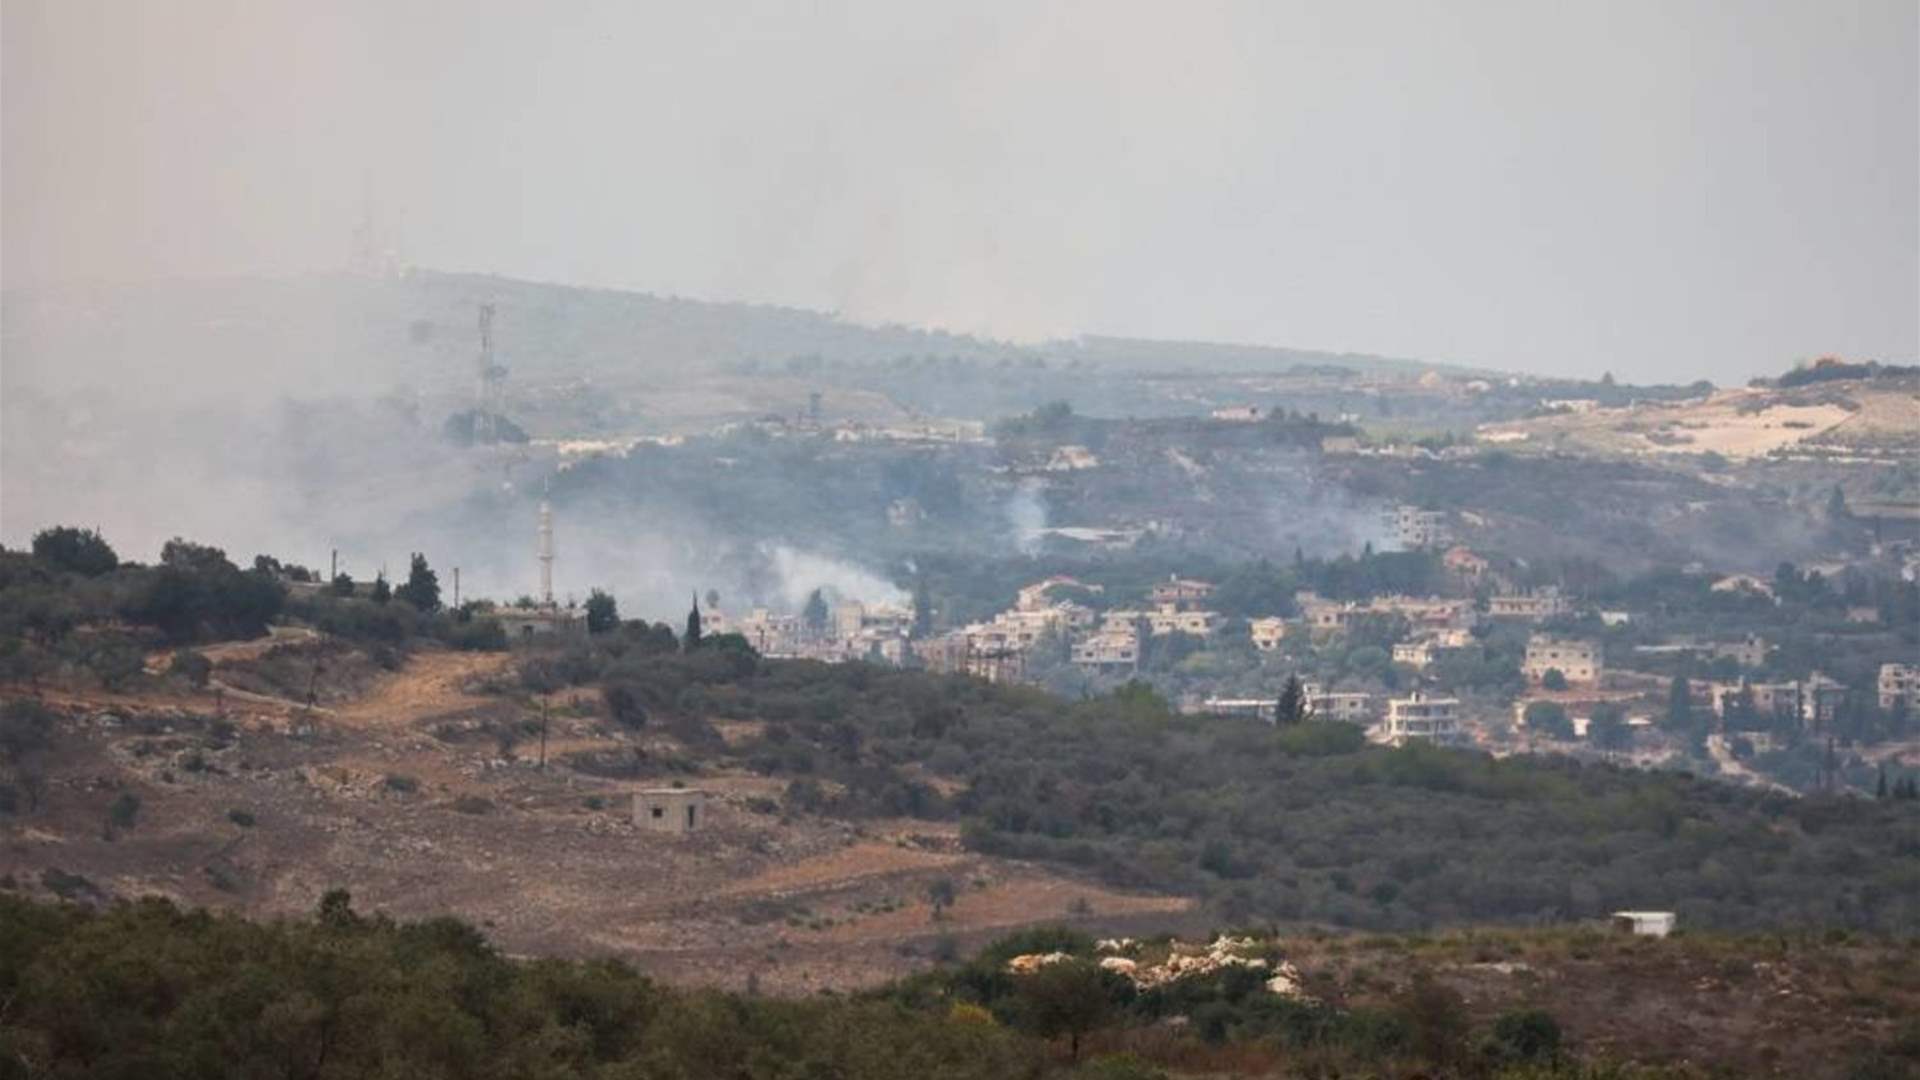 South Lebanon under fire: Israeli airstrike targets Hezbollah outpost in Beit Yaroun, resulting in five members killed